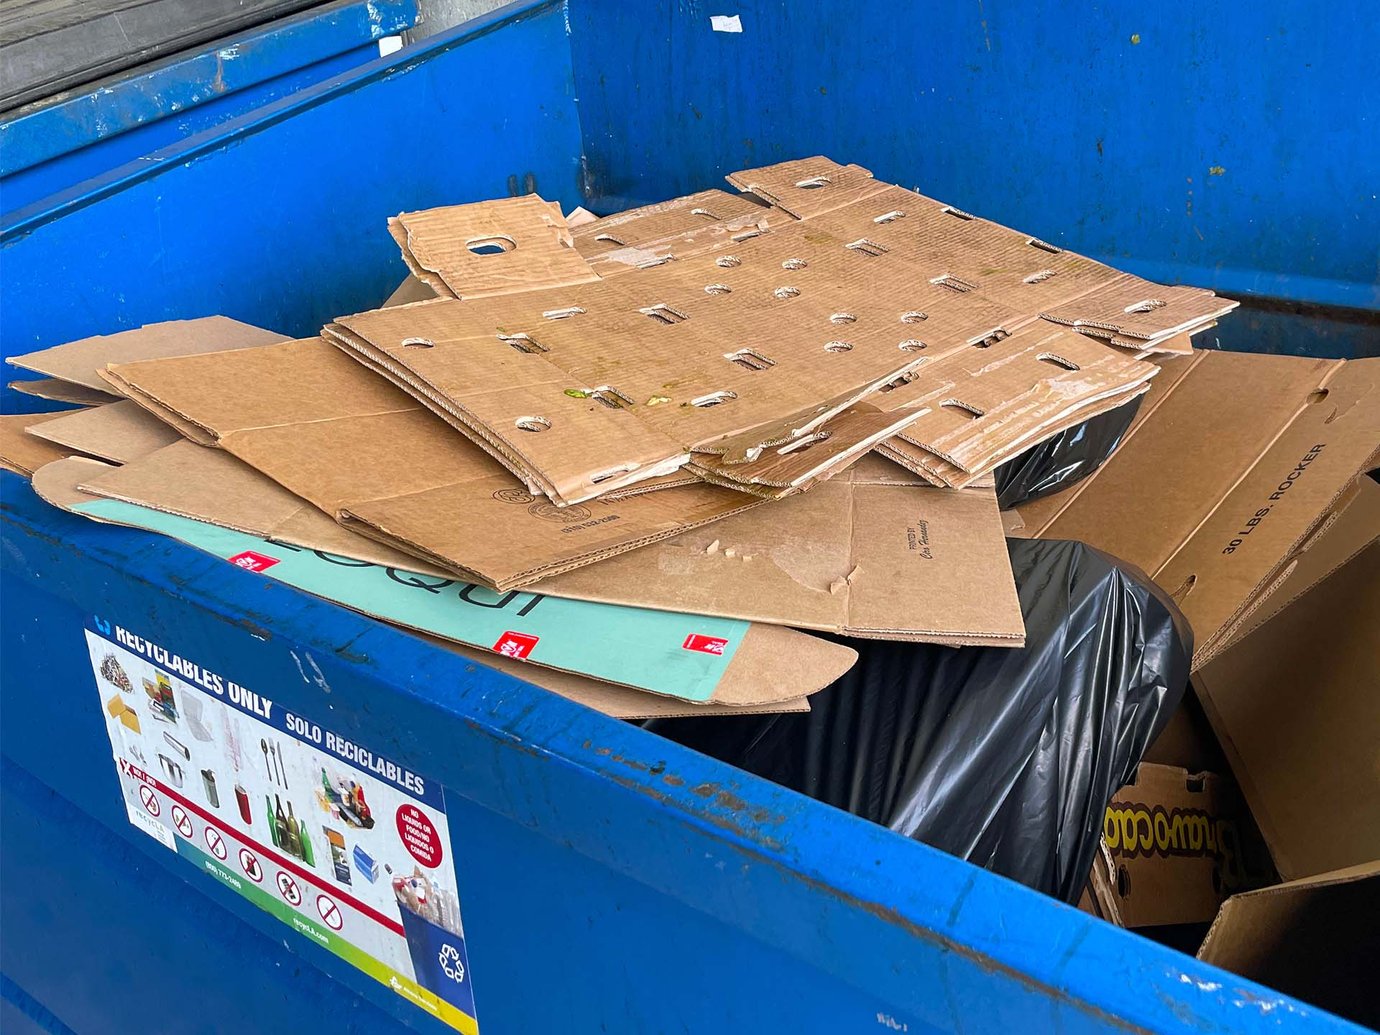 Cardboard recycling dumpster contaminated with a black garbage bag